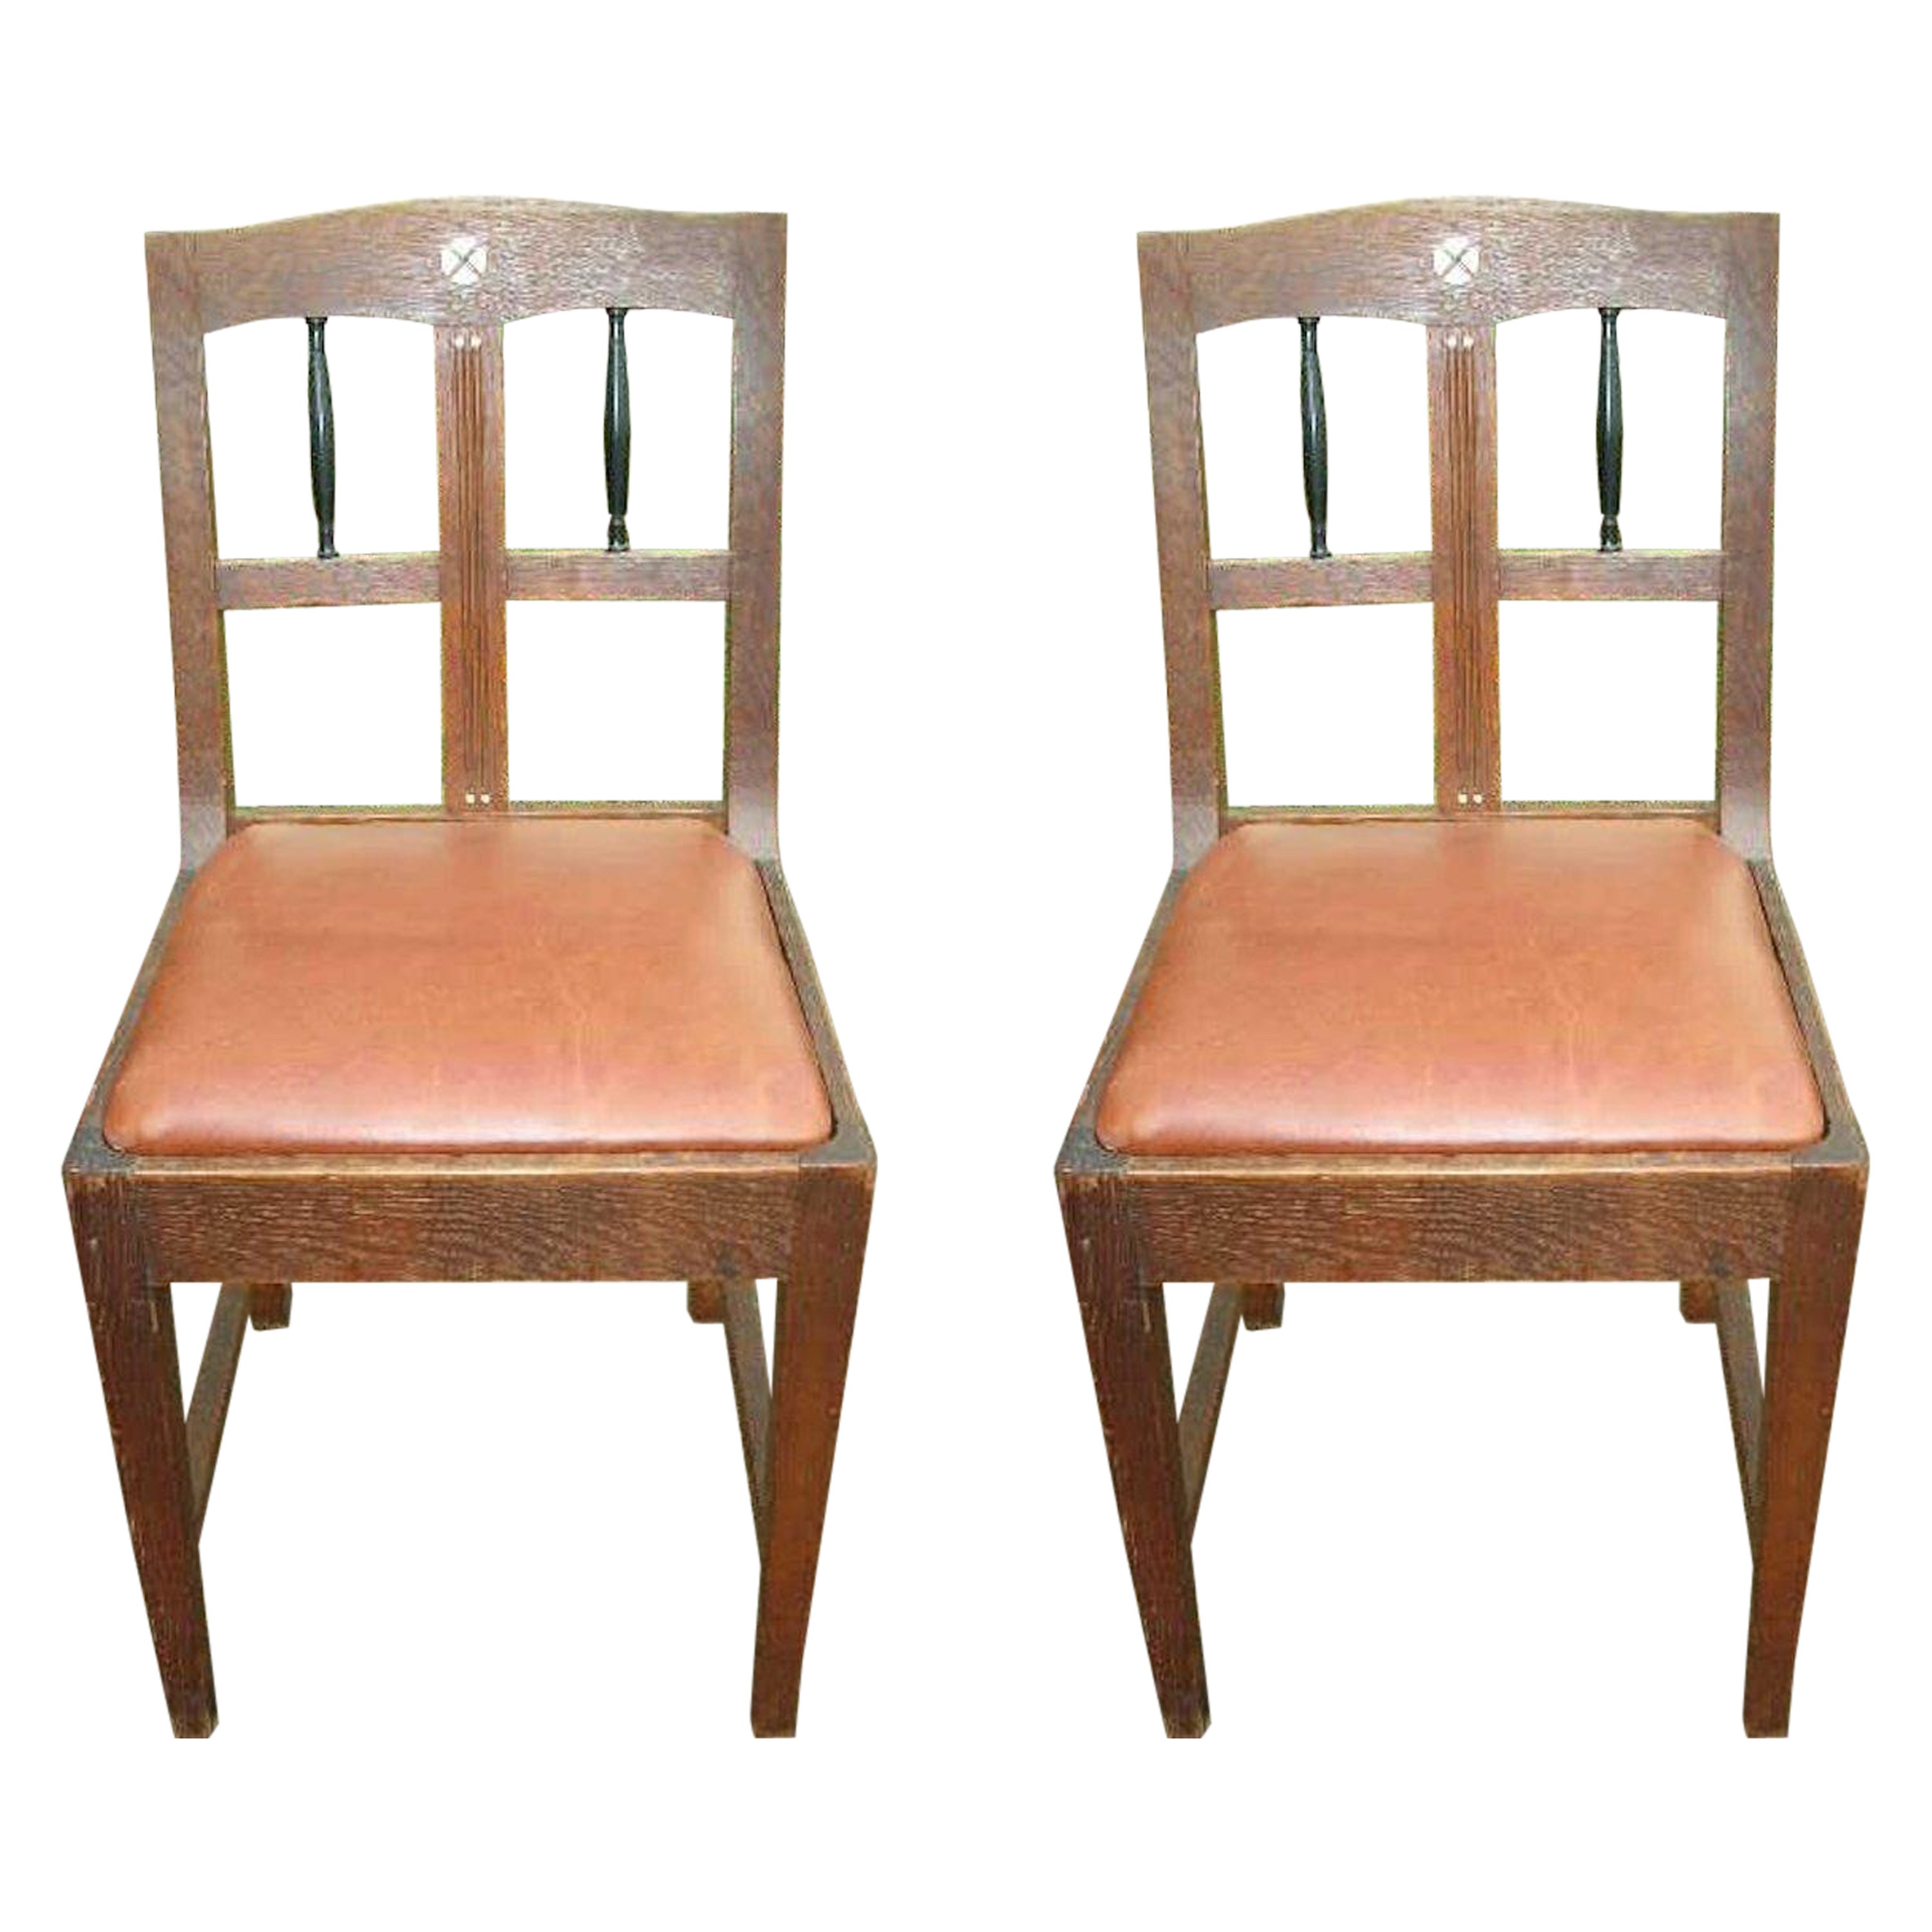 Pair of Secessionist Style Oak Side Chairs with Ebonized Spindles